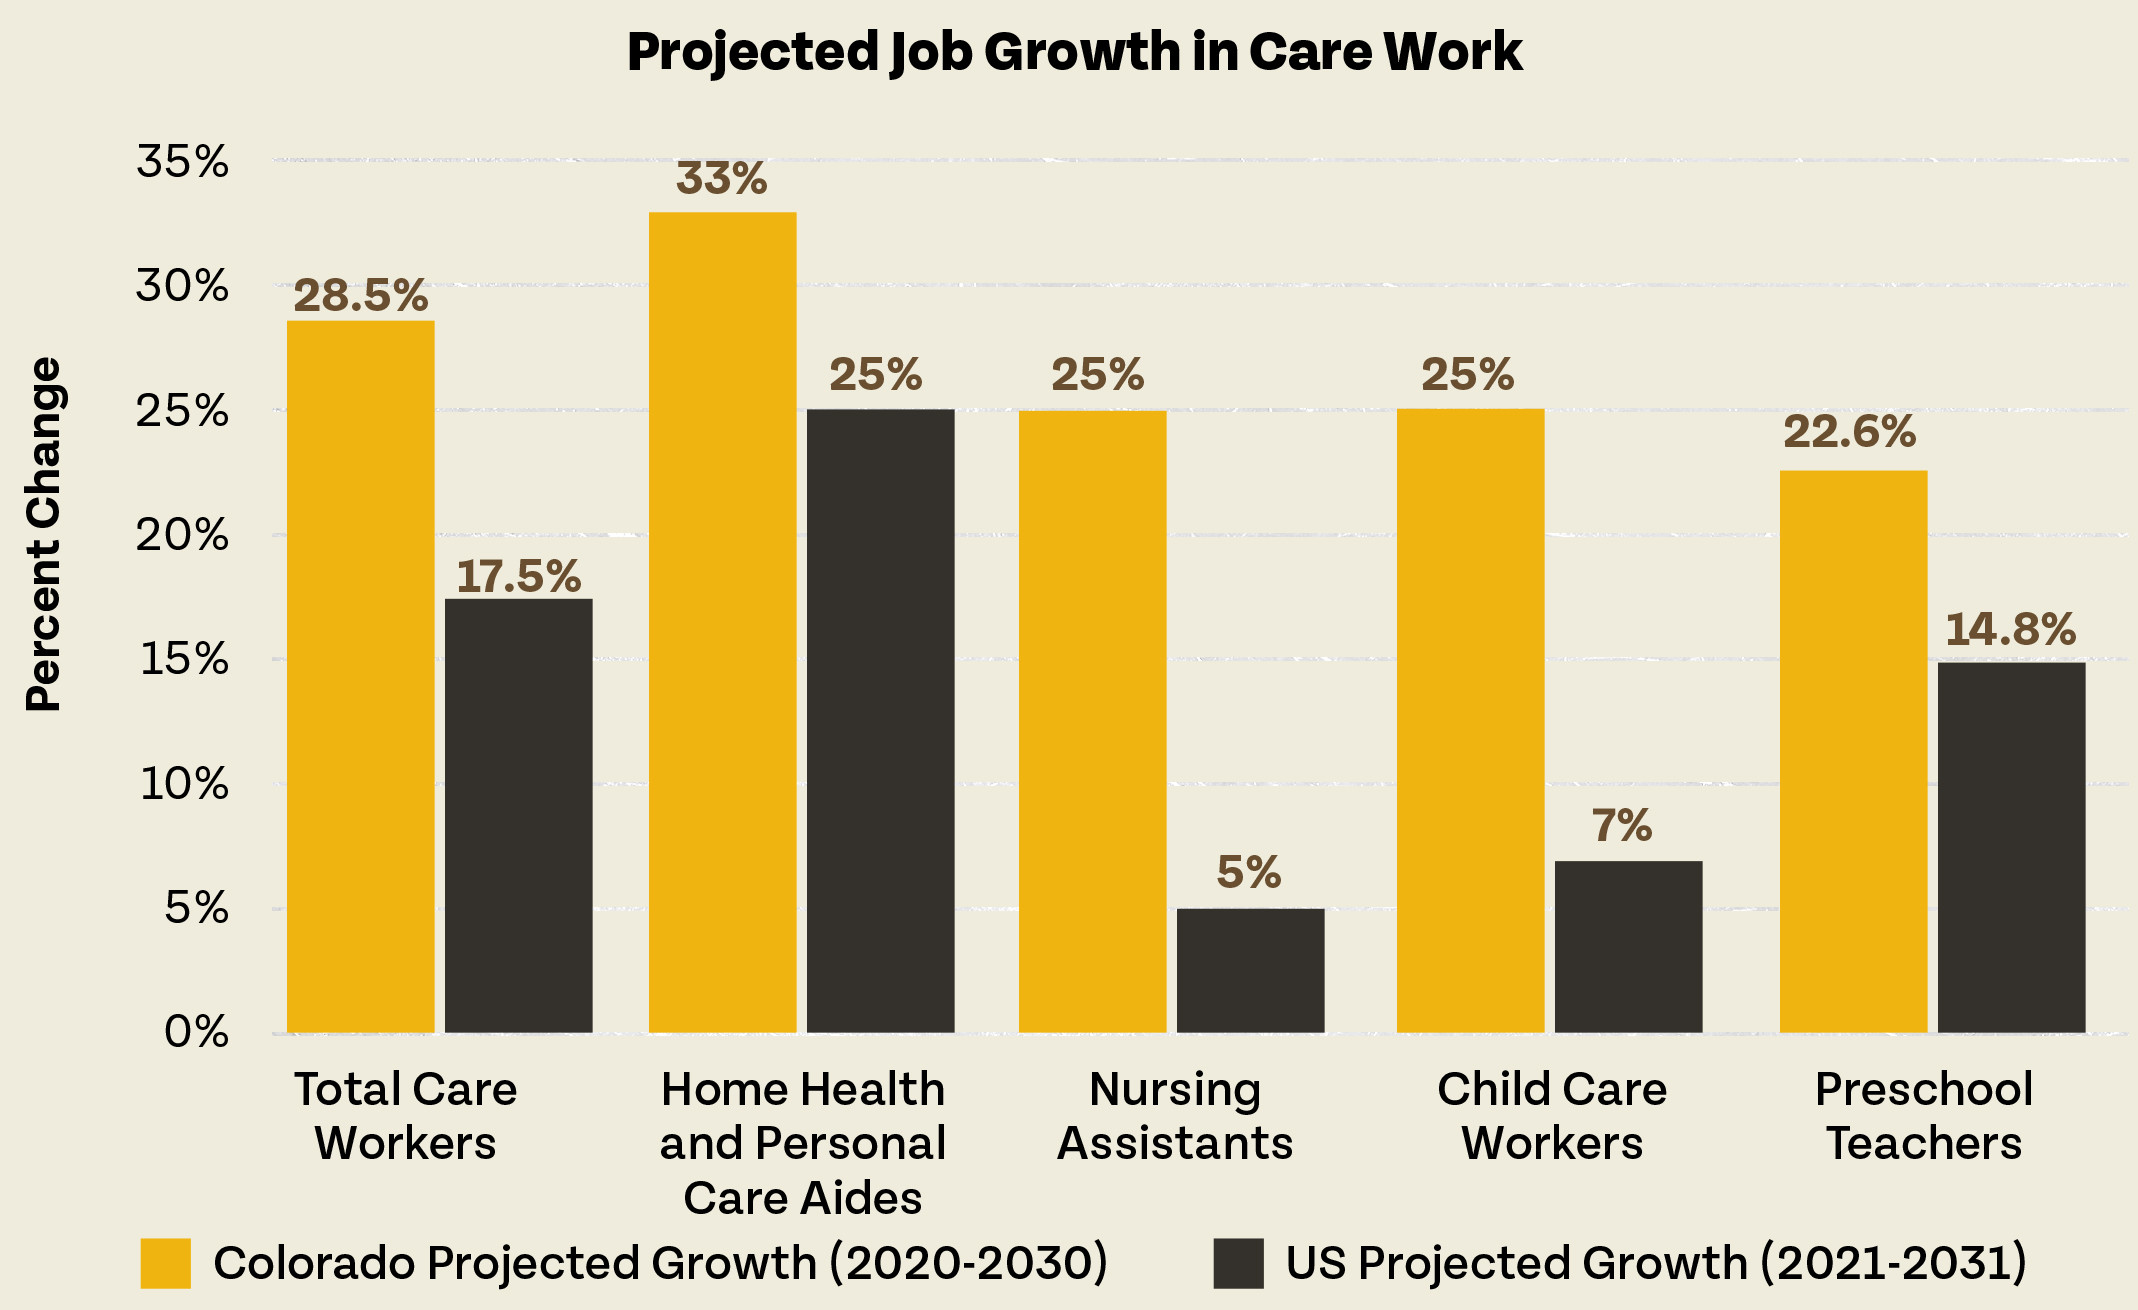 Projected Job Growth in Care Work